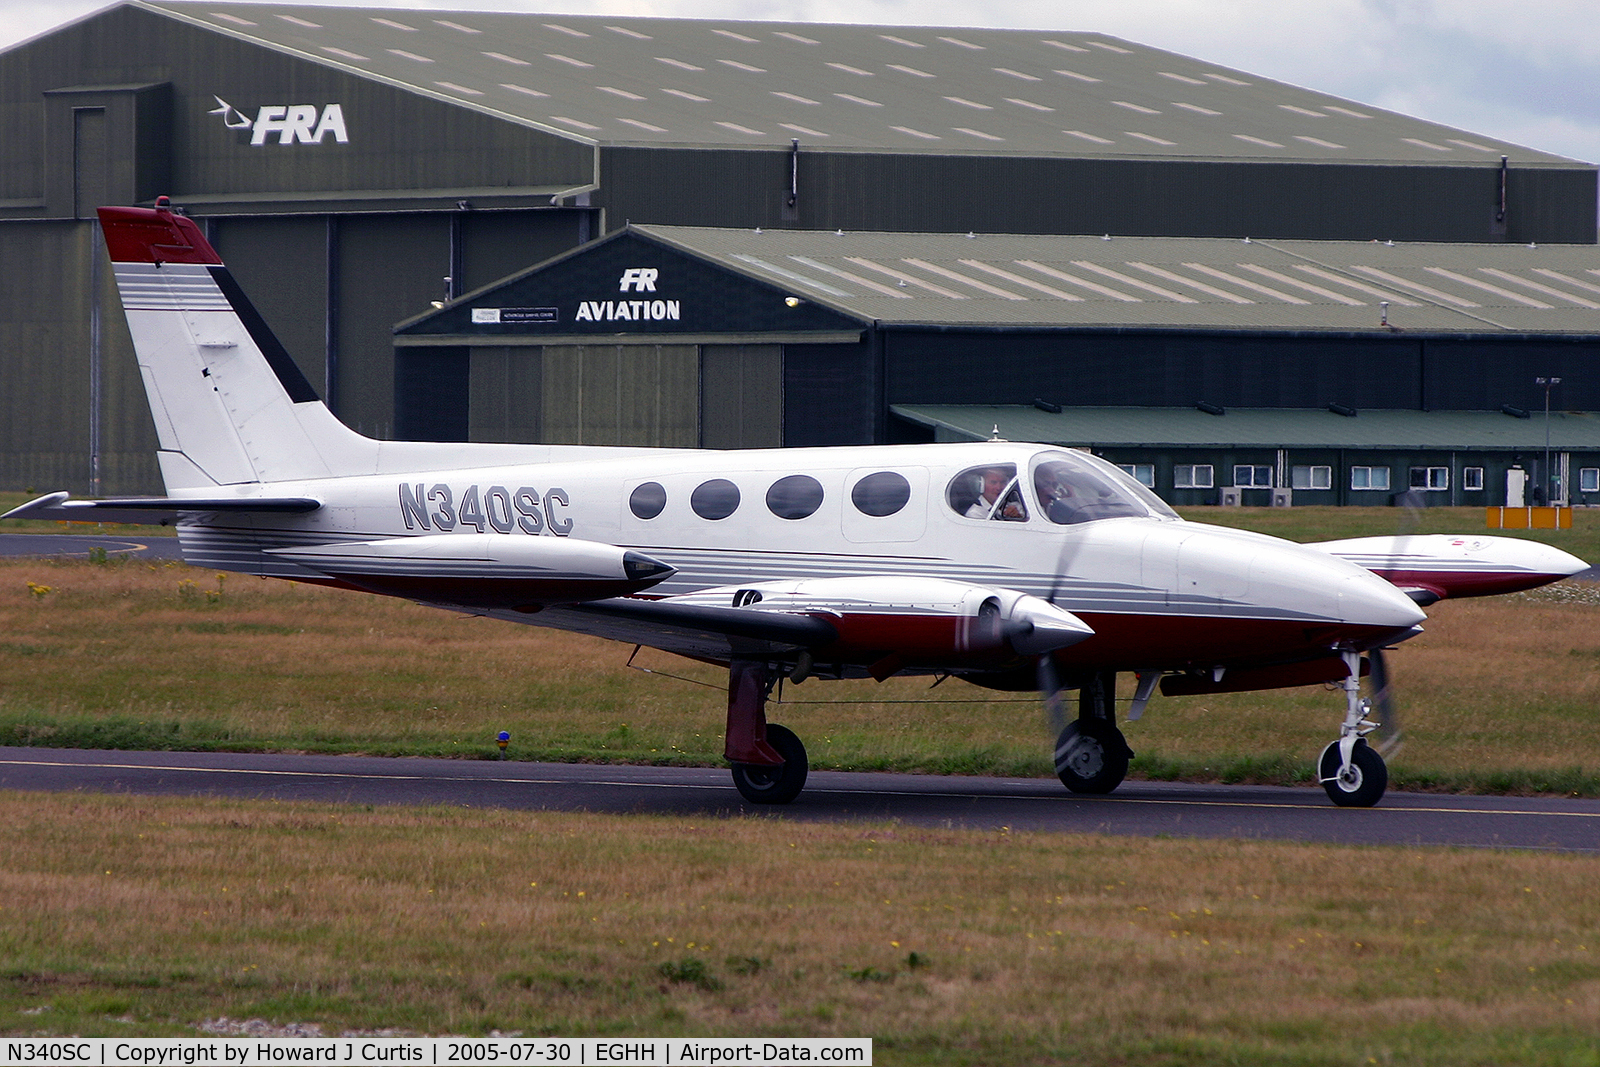 N340SC, 1974 Cessna 340 C/N 340-0363, Privately owned.